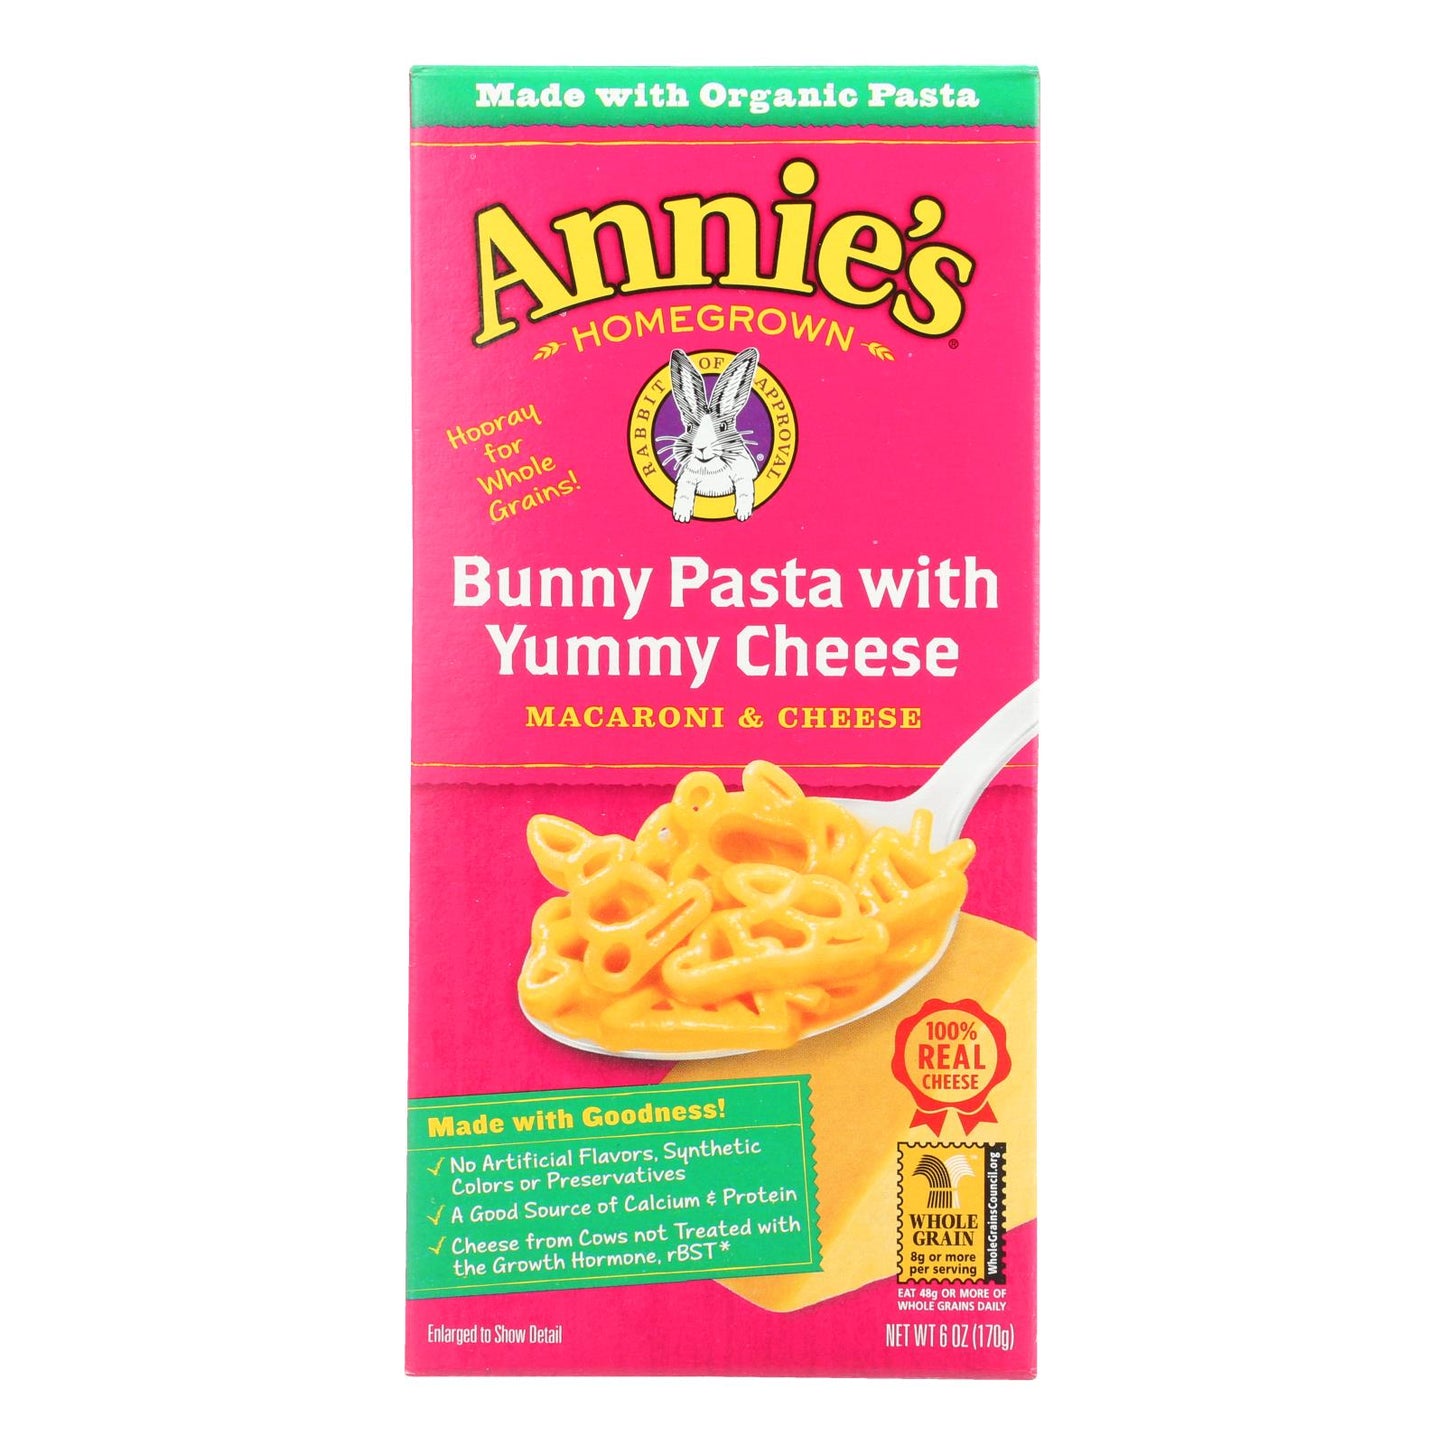 Annies Homegrown Macaroni And Cheese - Organic - Bunny Pasta With Yummy Cheese - 6 Oz - Case Of 12